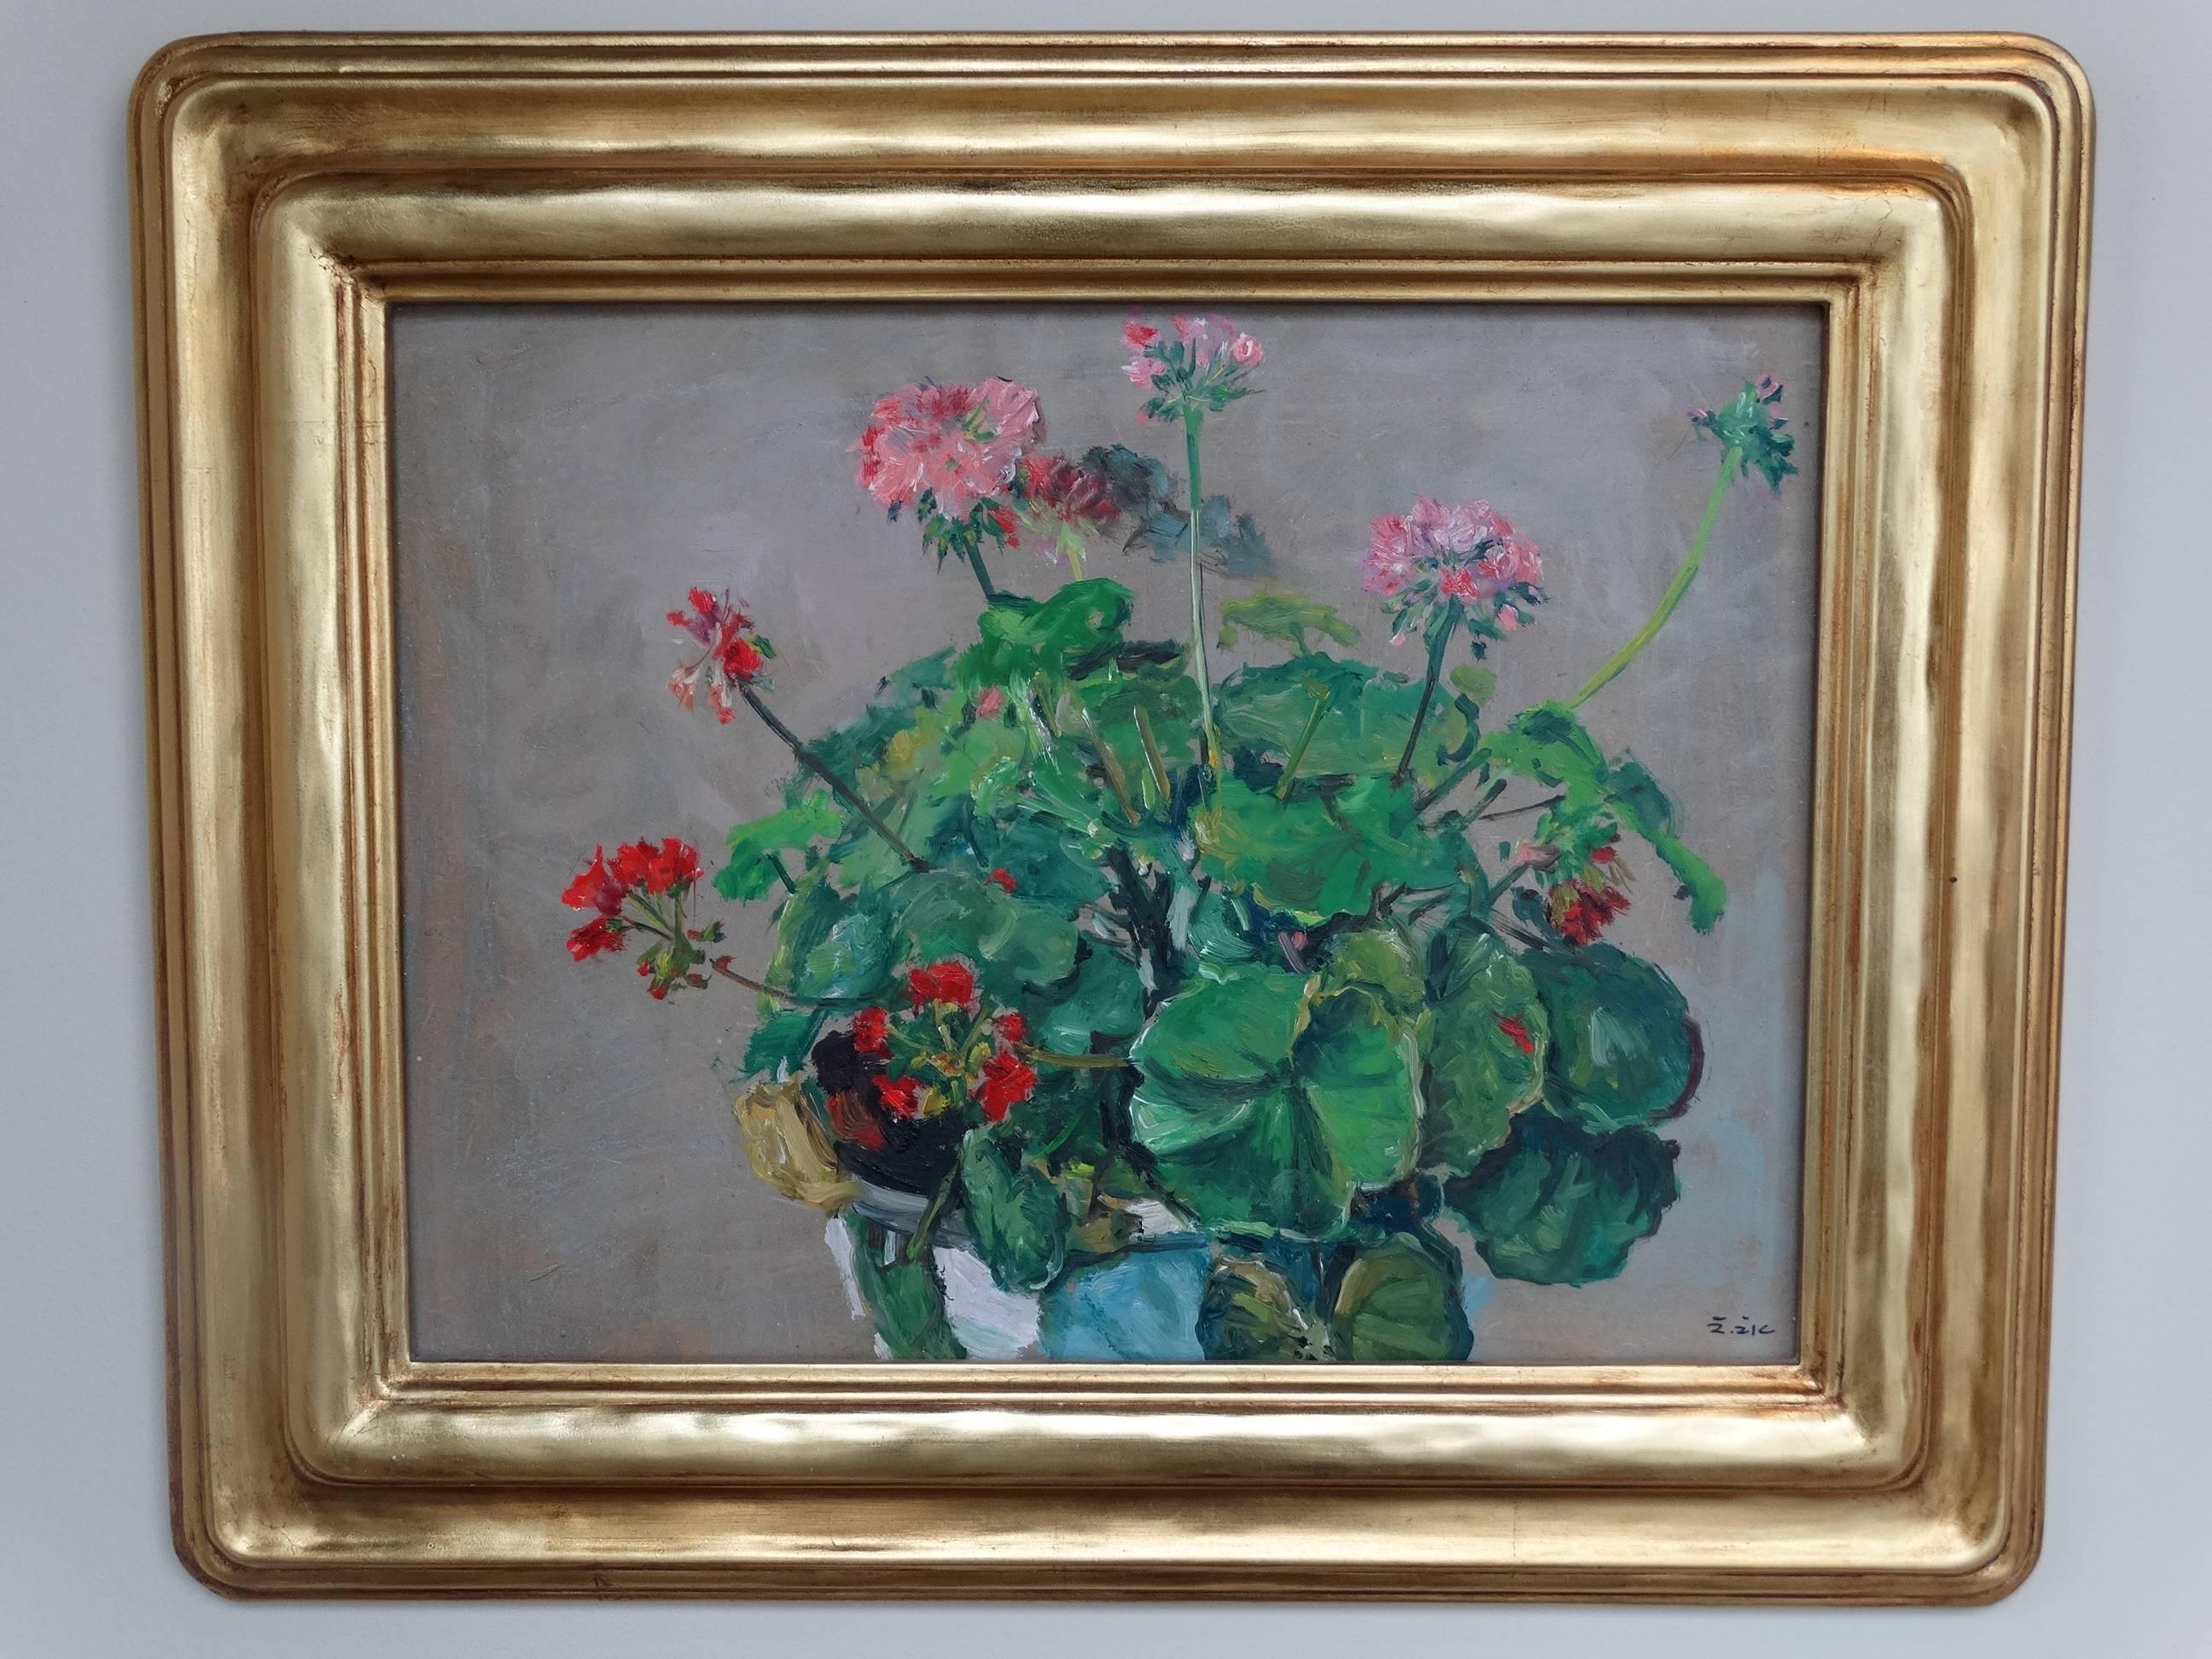 Red and Pink Geraniums - Painting by Zivko Zic